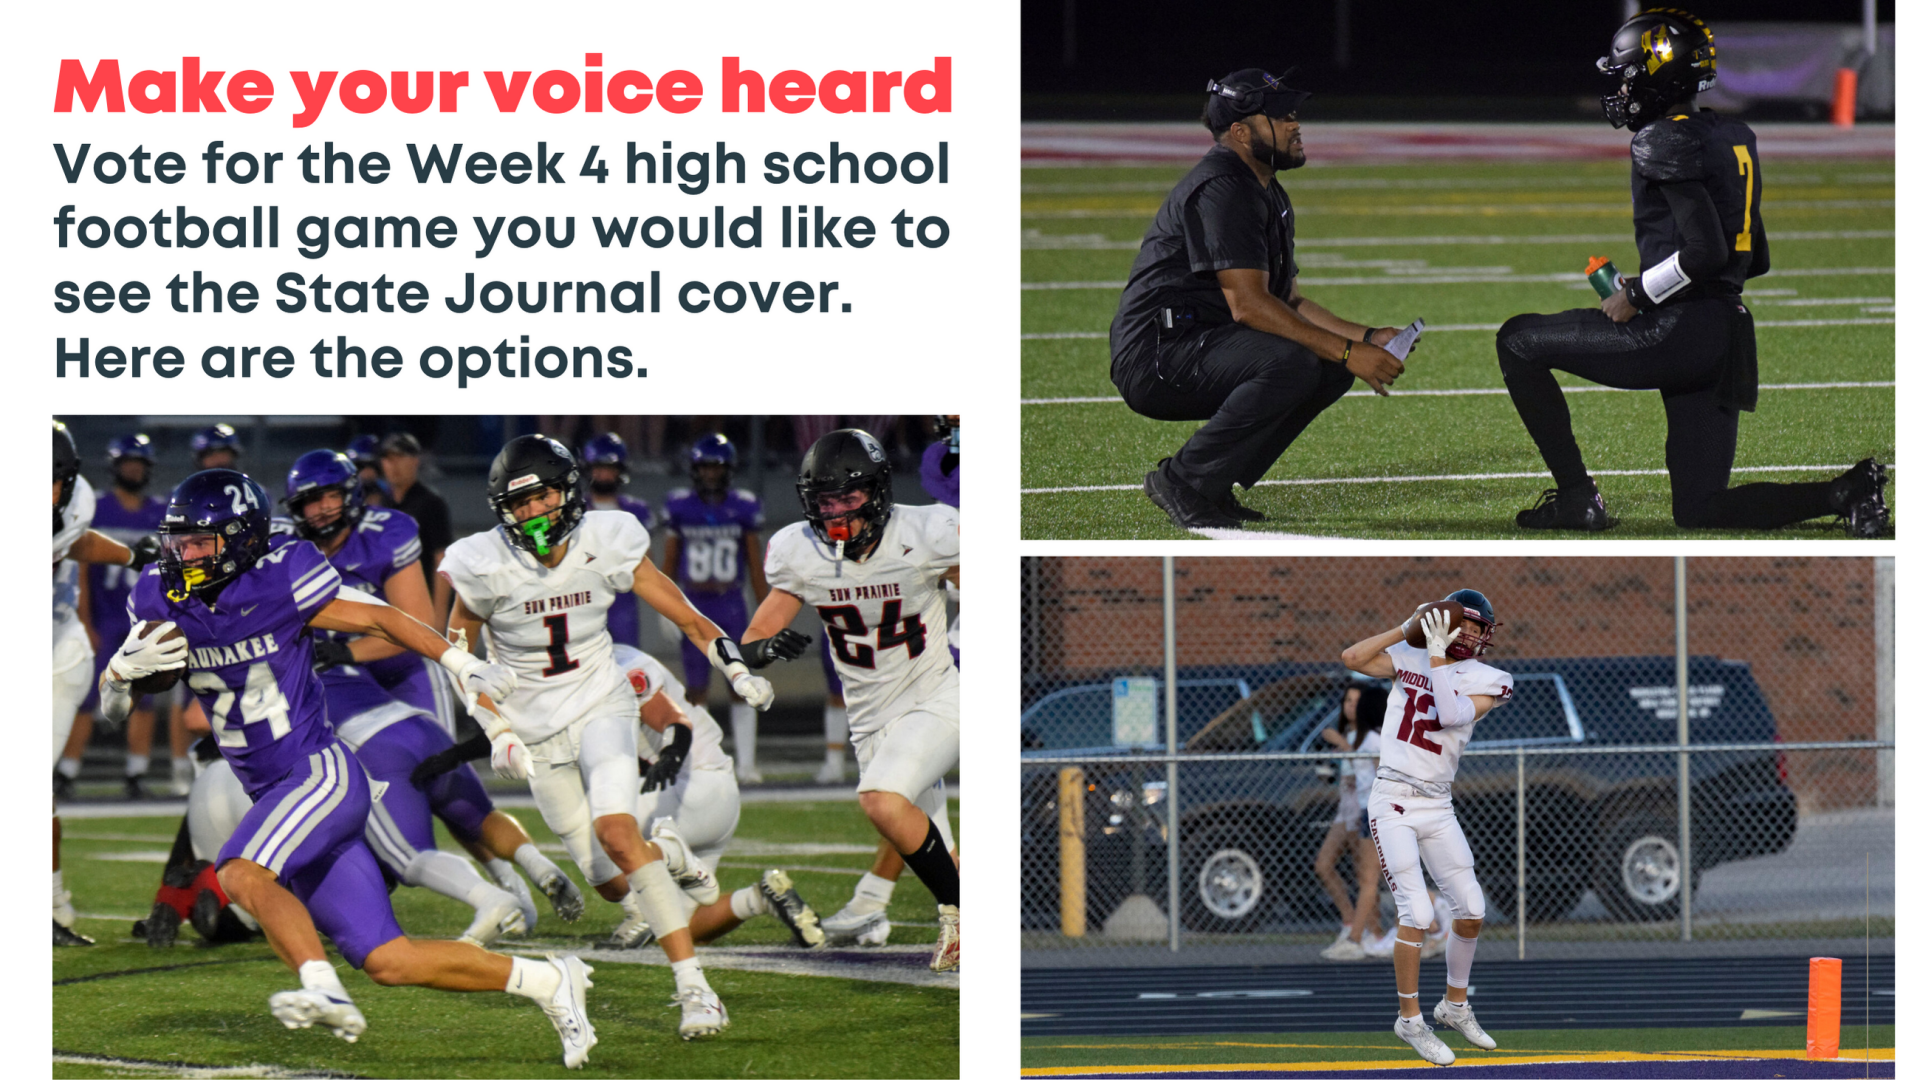 Vote for the Week 4 High School Football Game to be Covered in Madison